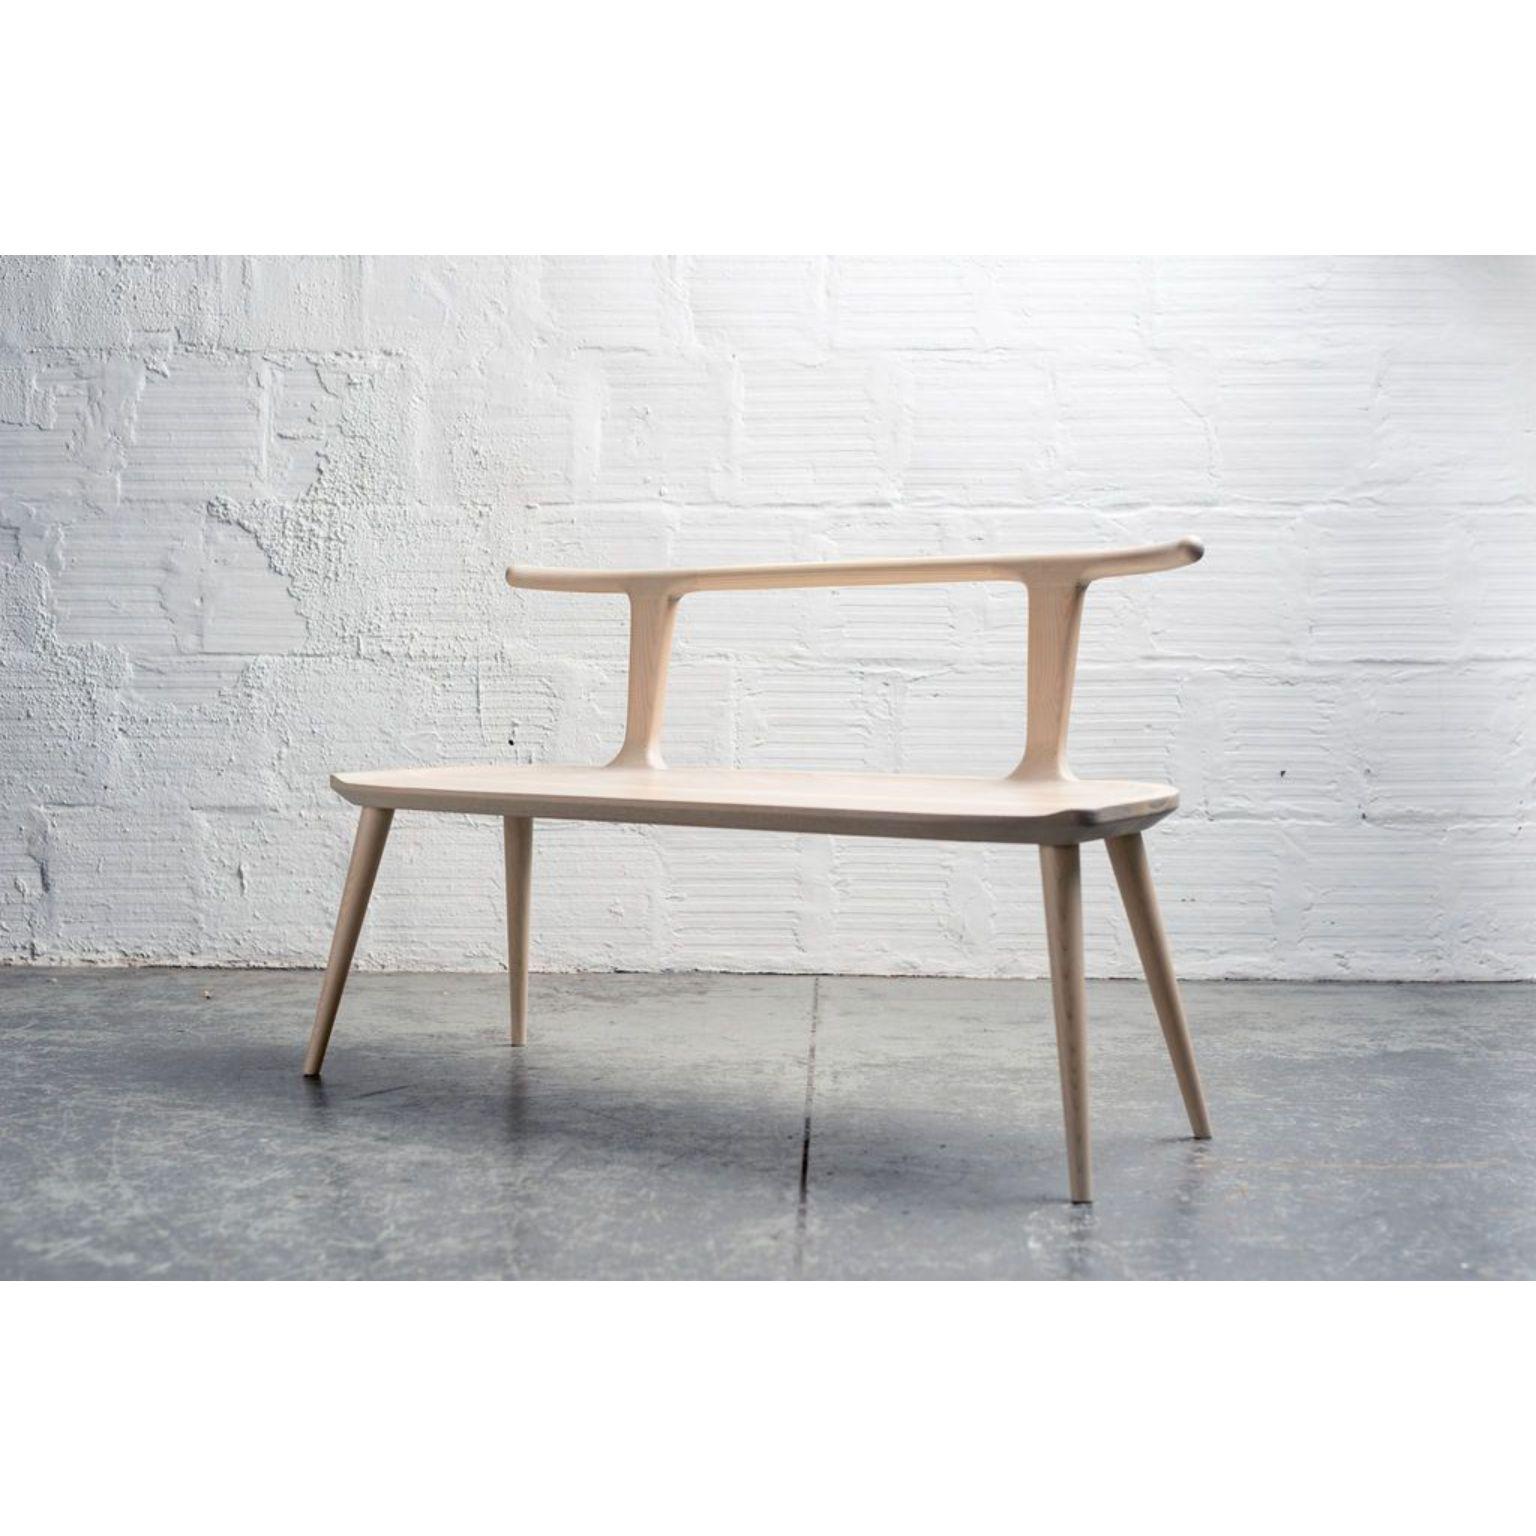 White Ash Oxbend Bench by Fernweh Woodworking
Dimensions: W 122 (4´) x D 45,7 x H 76,2 cm
Materials: White ash.

Other width dimensions available: 122, 152,4 and 182,9 cm
Wood options: walnut, charcoal ash, white ash.
Please contact us.

This